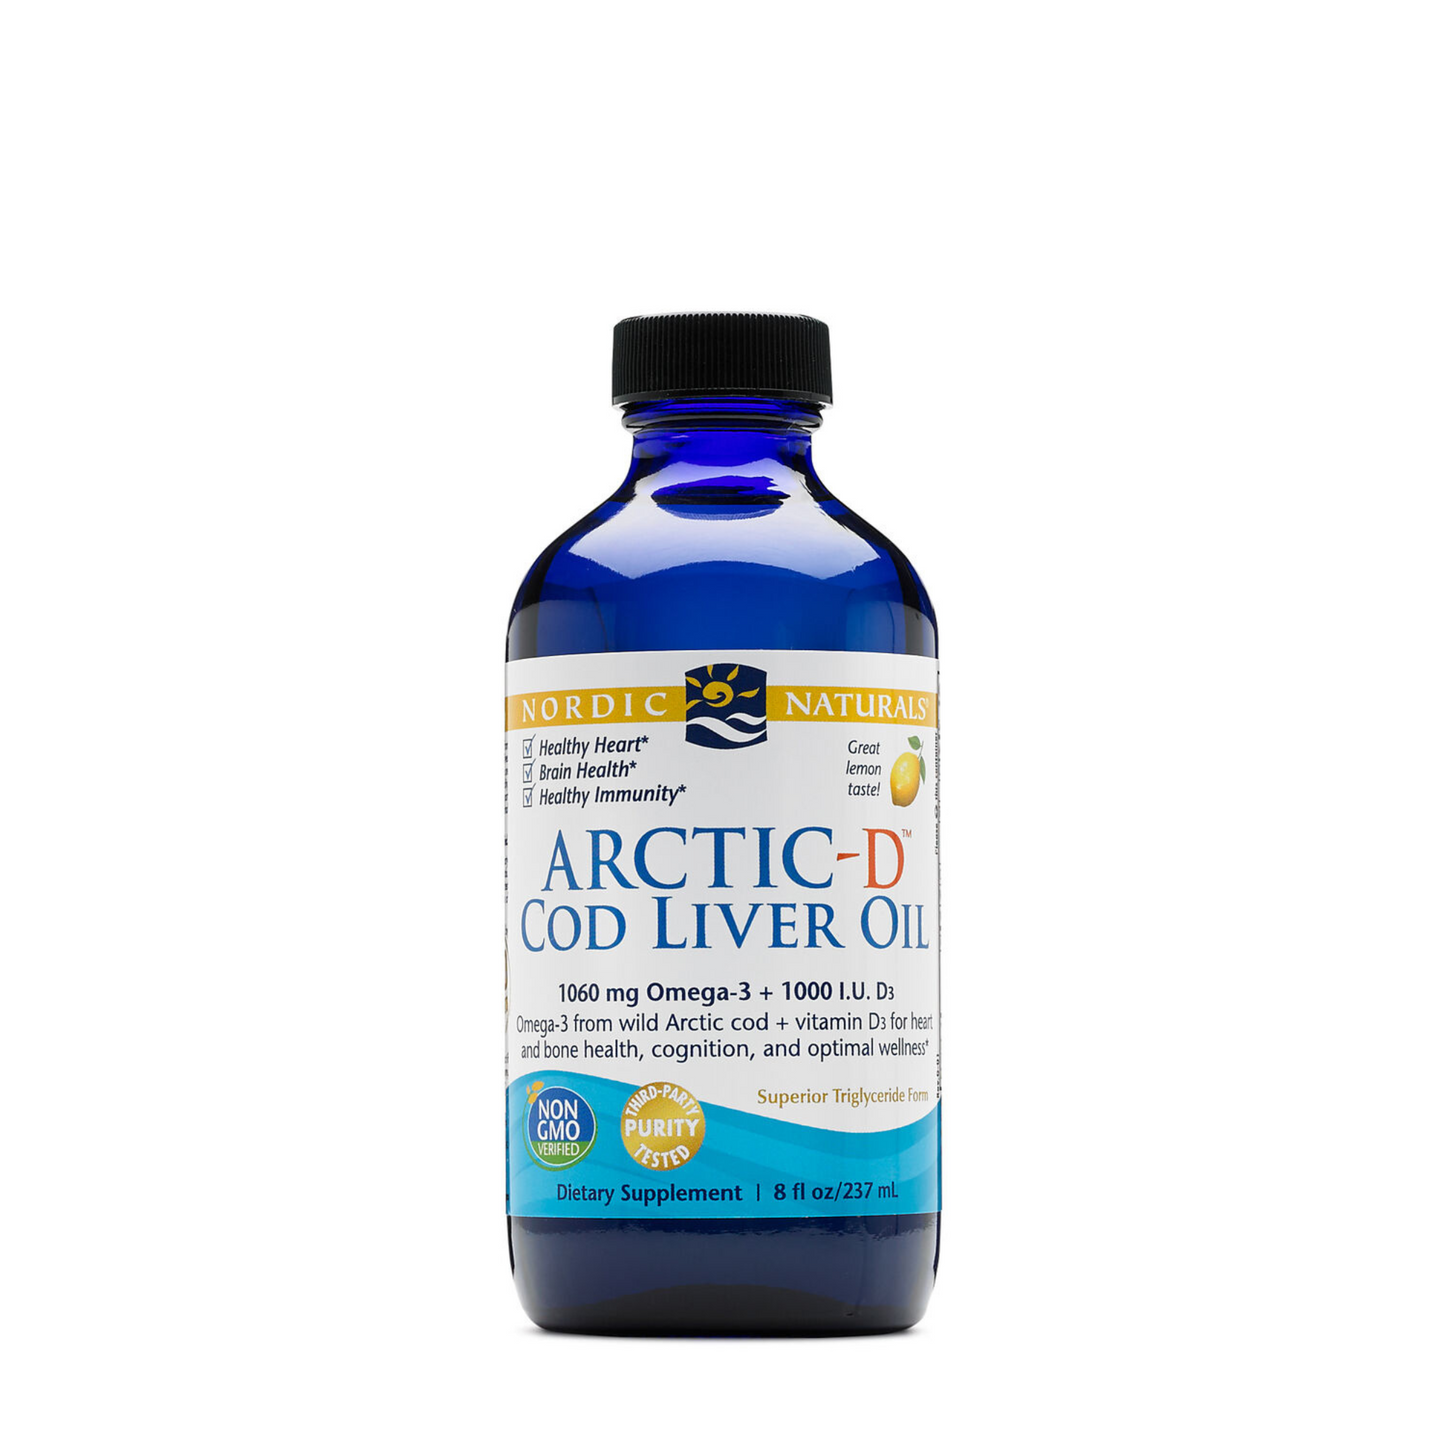 Primary image of Arctic-D Cod Liver Oil (Lemon Flavored)